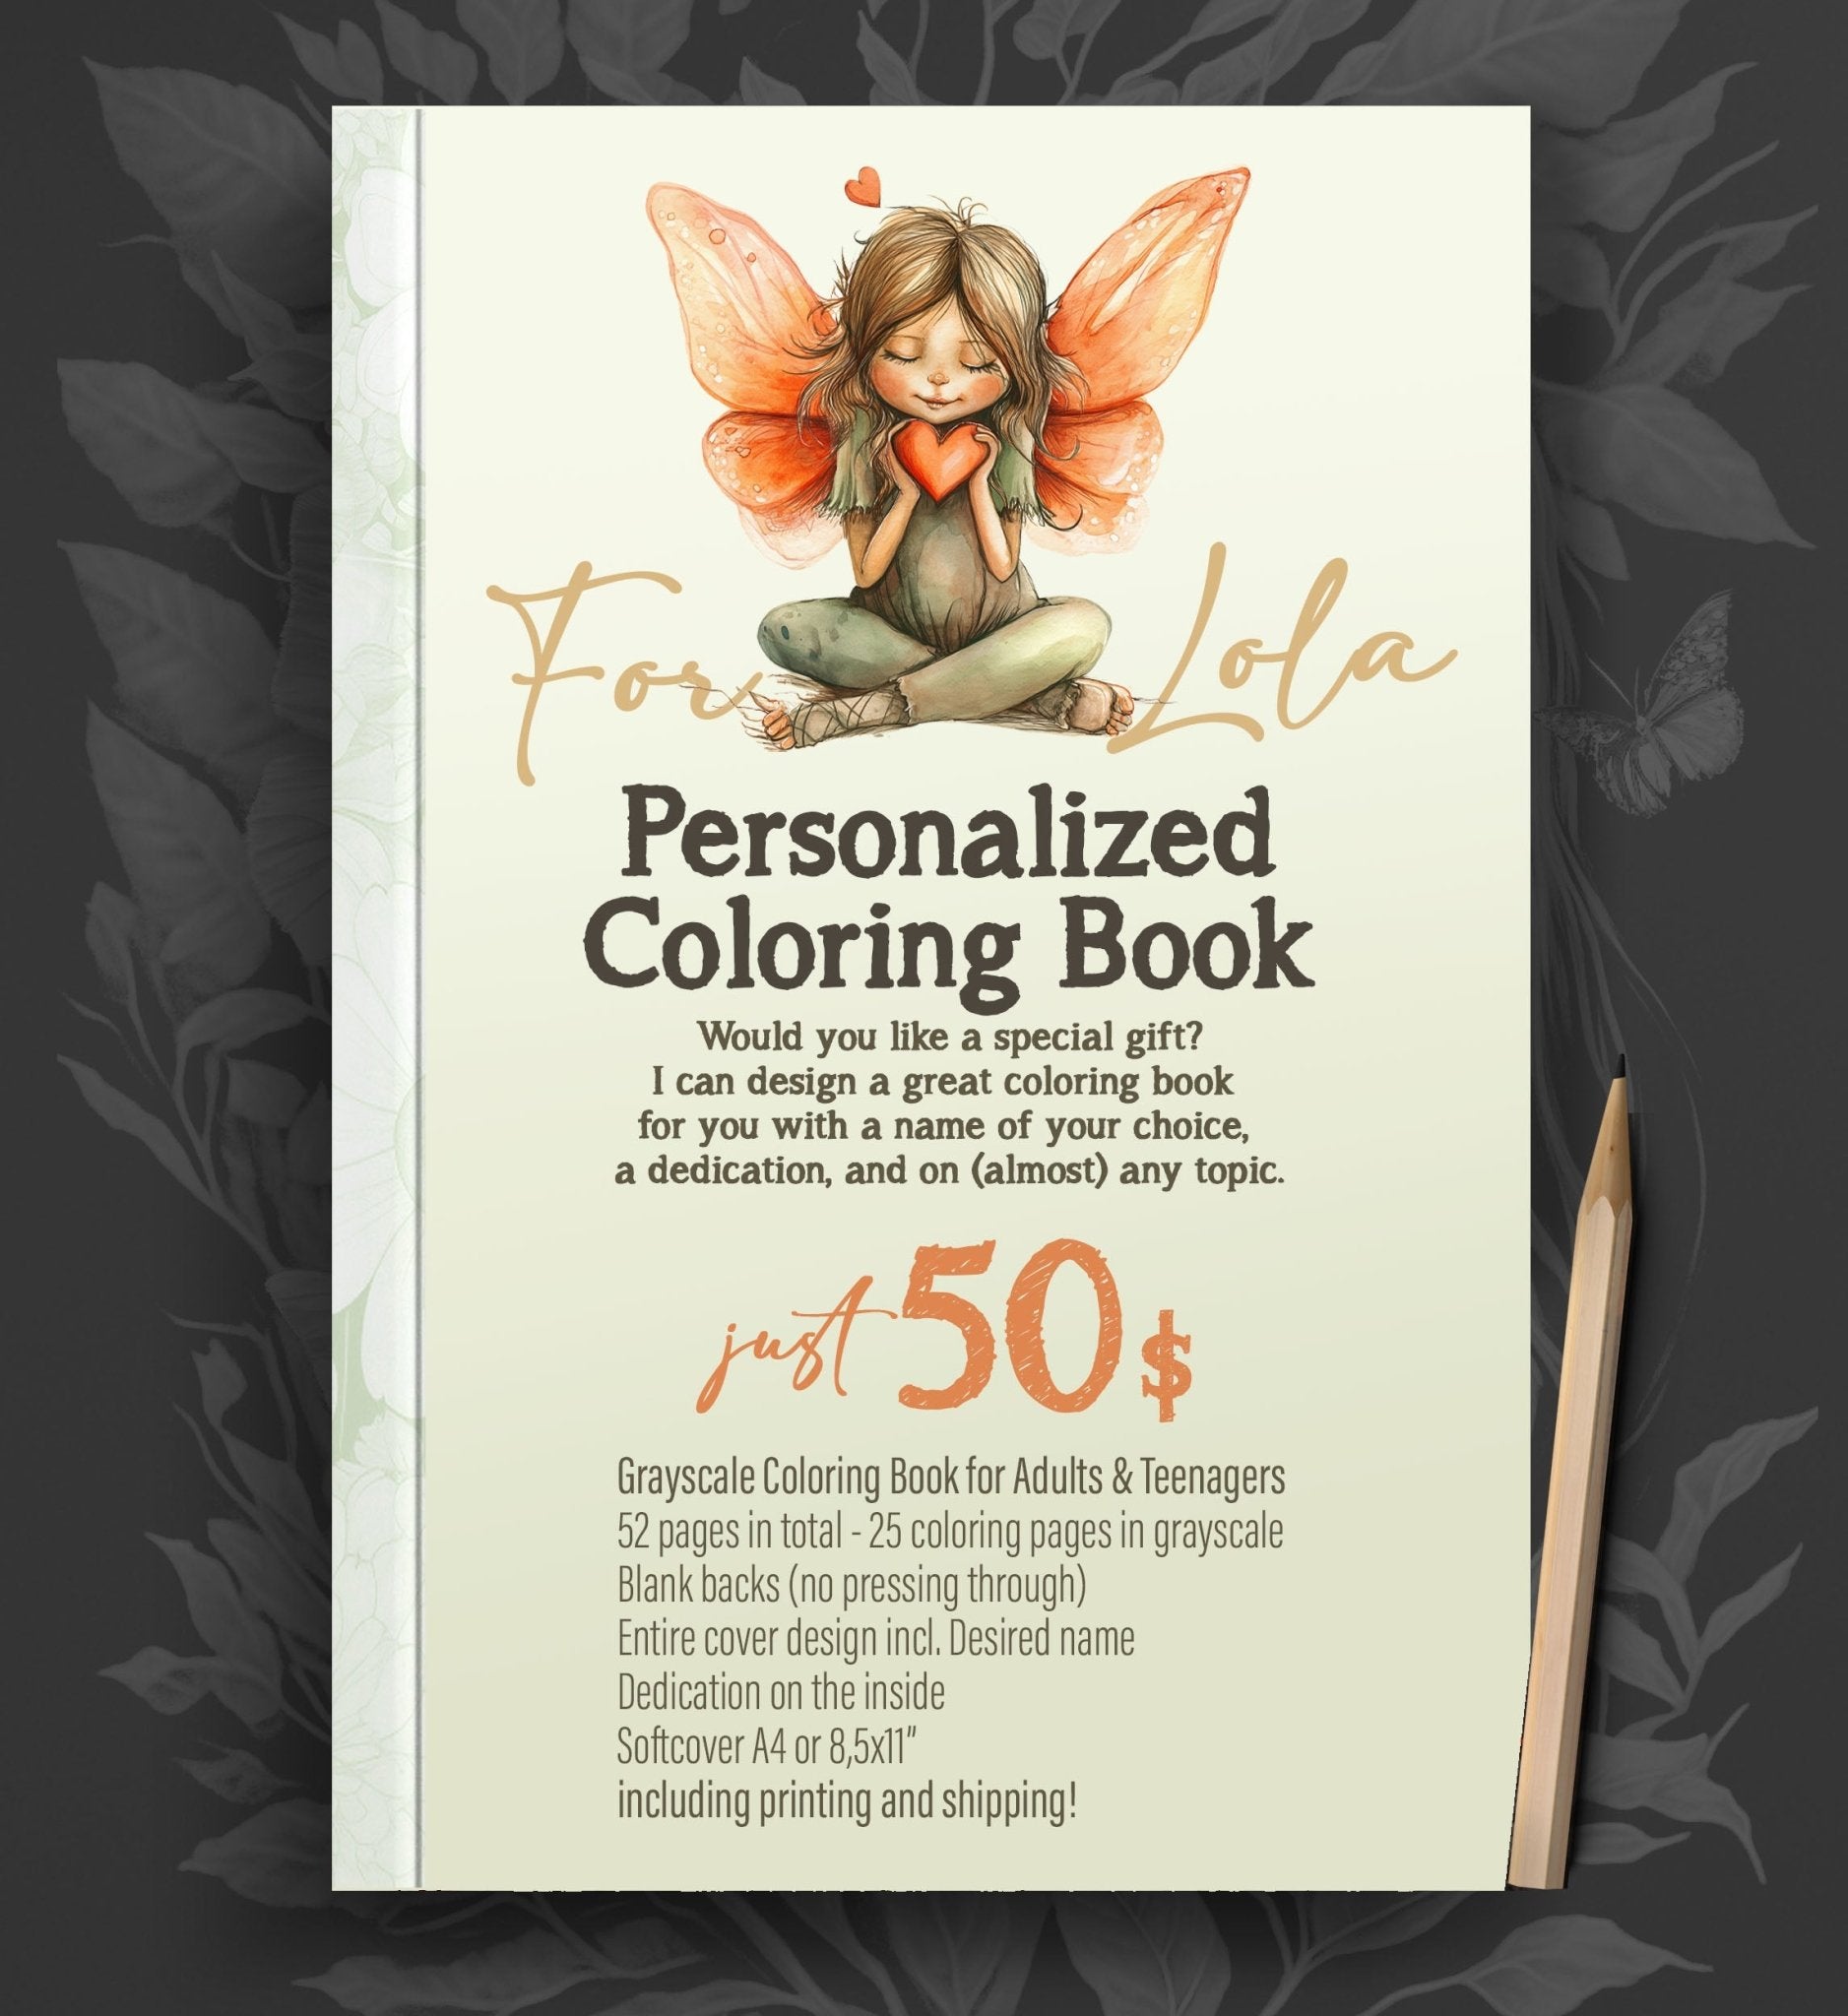 A special offer - Personalized Coloring Book - Monsoon Publishing USA